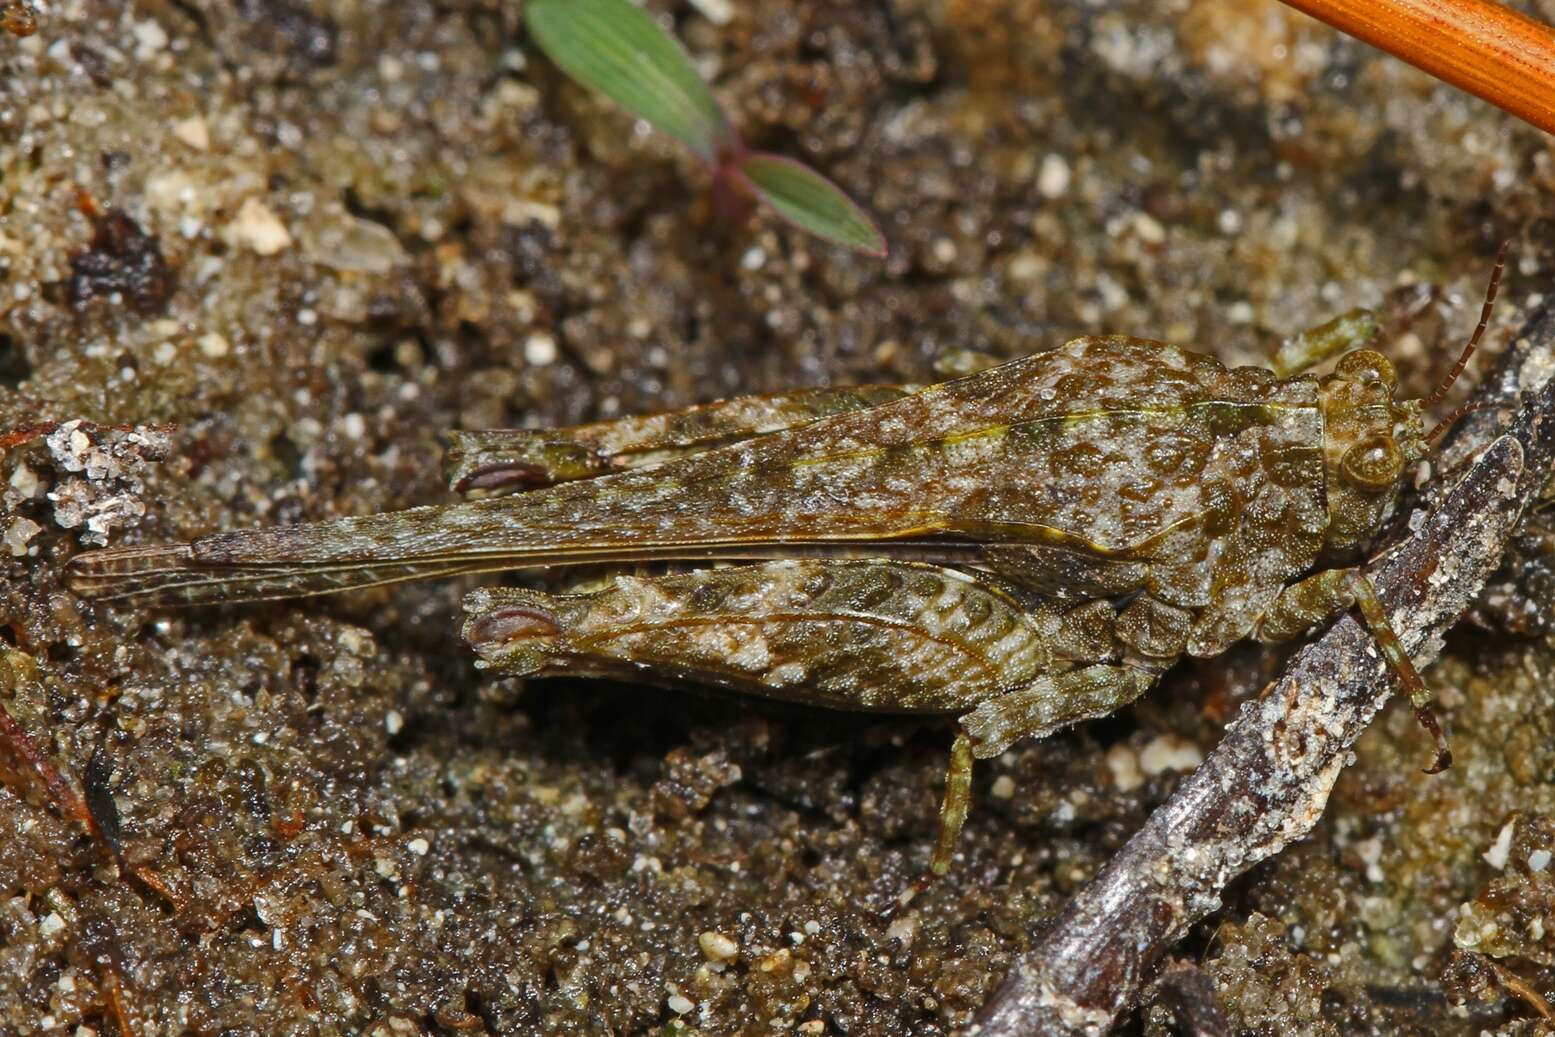 Image of Mexican Pygmy Grasshopper